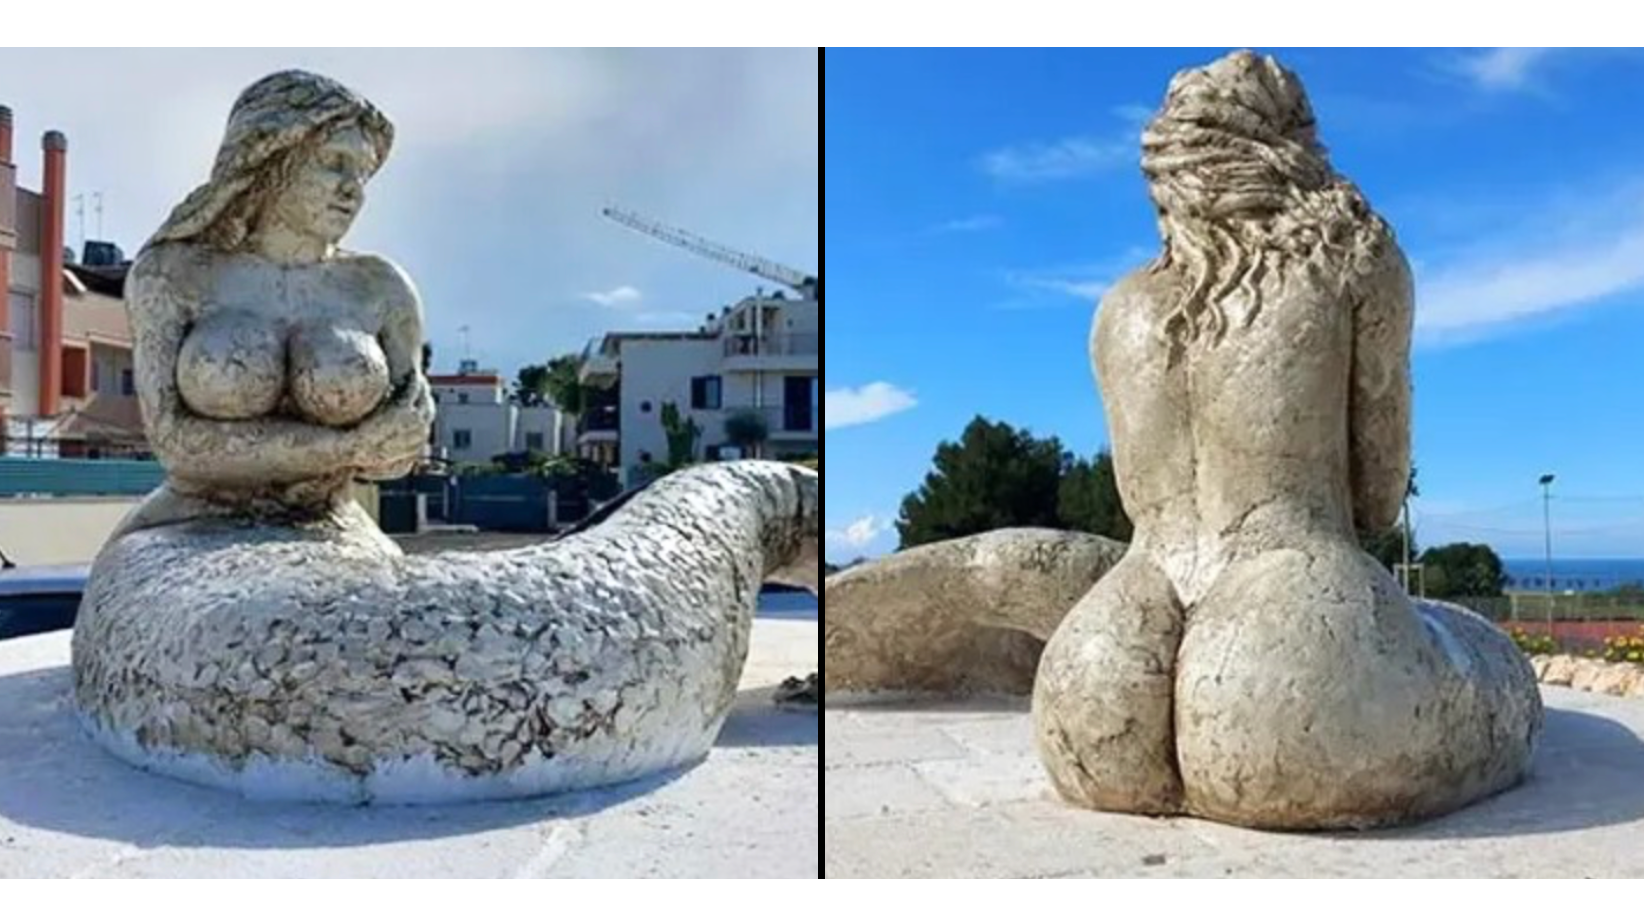 Mermaid statue with big bum criticised for being too sexual